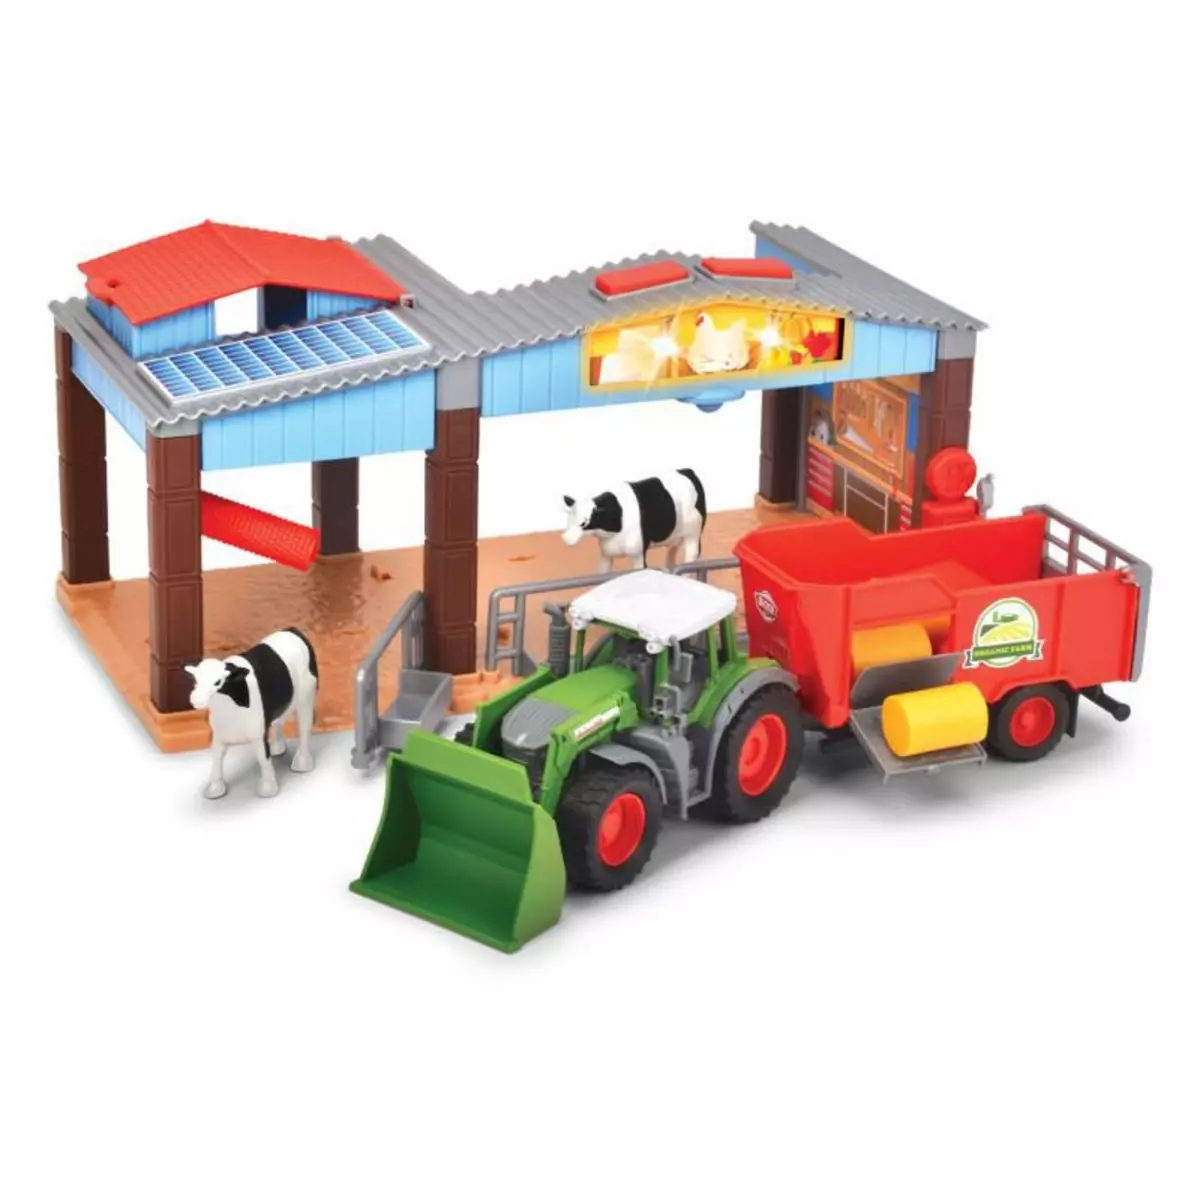 Dickie Dickie Farm and Fendt Tractor Playset 203735003